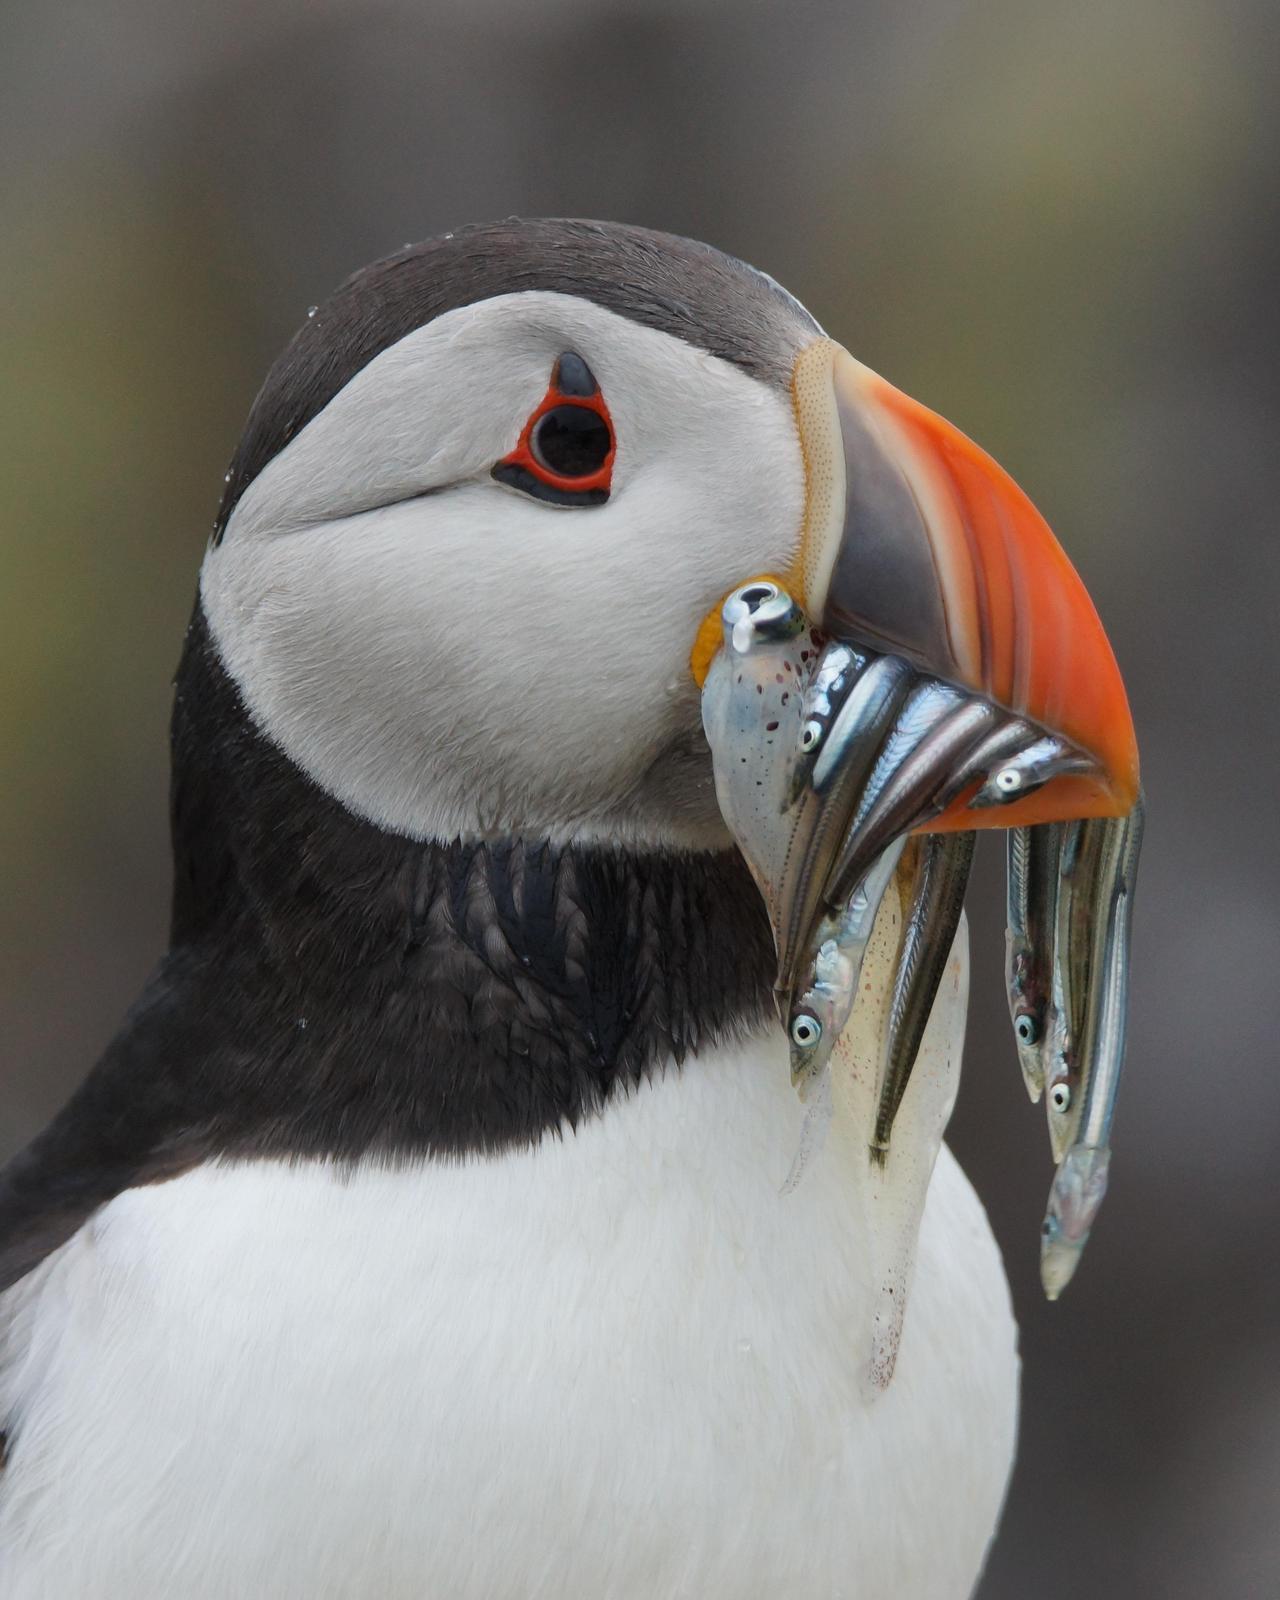 Atlantic Puffin Photo by Steve Percival